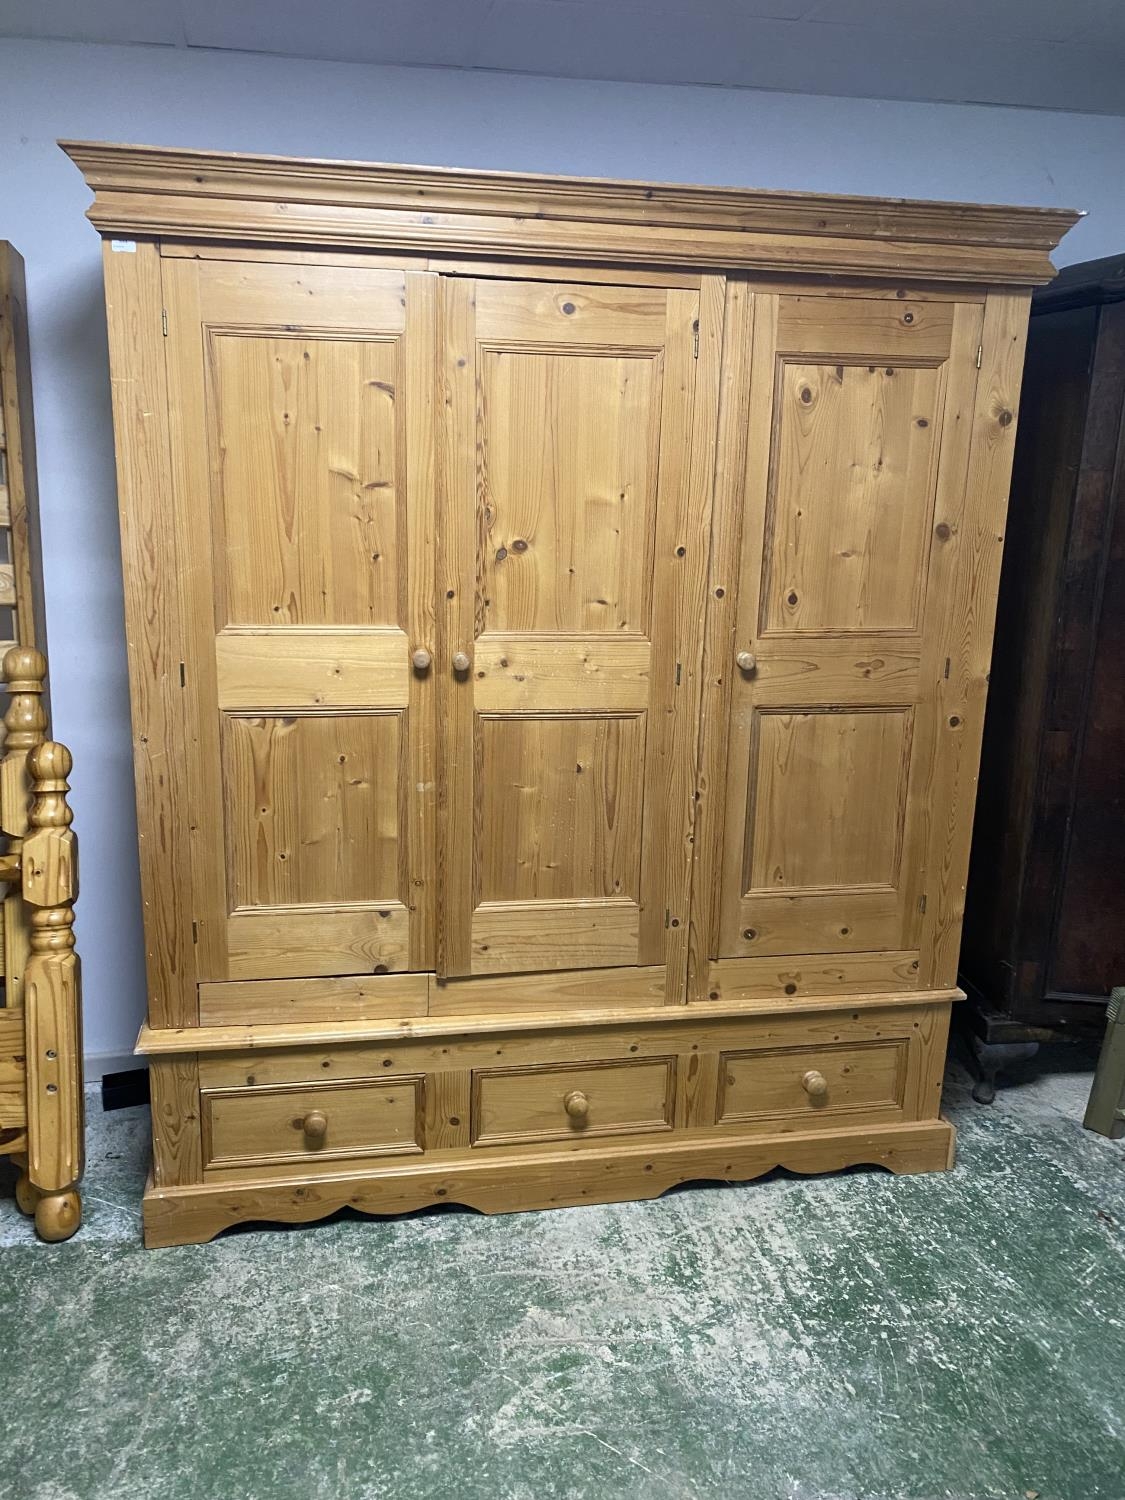 Large 3 door pine wardrobe, with 3 drawers below, 170cmW x 195cmH , some wear and paint marks and